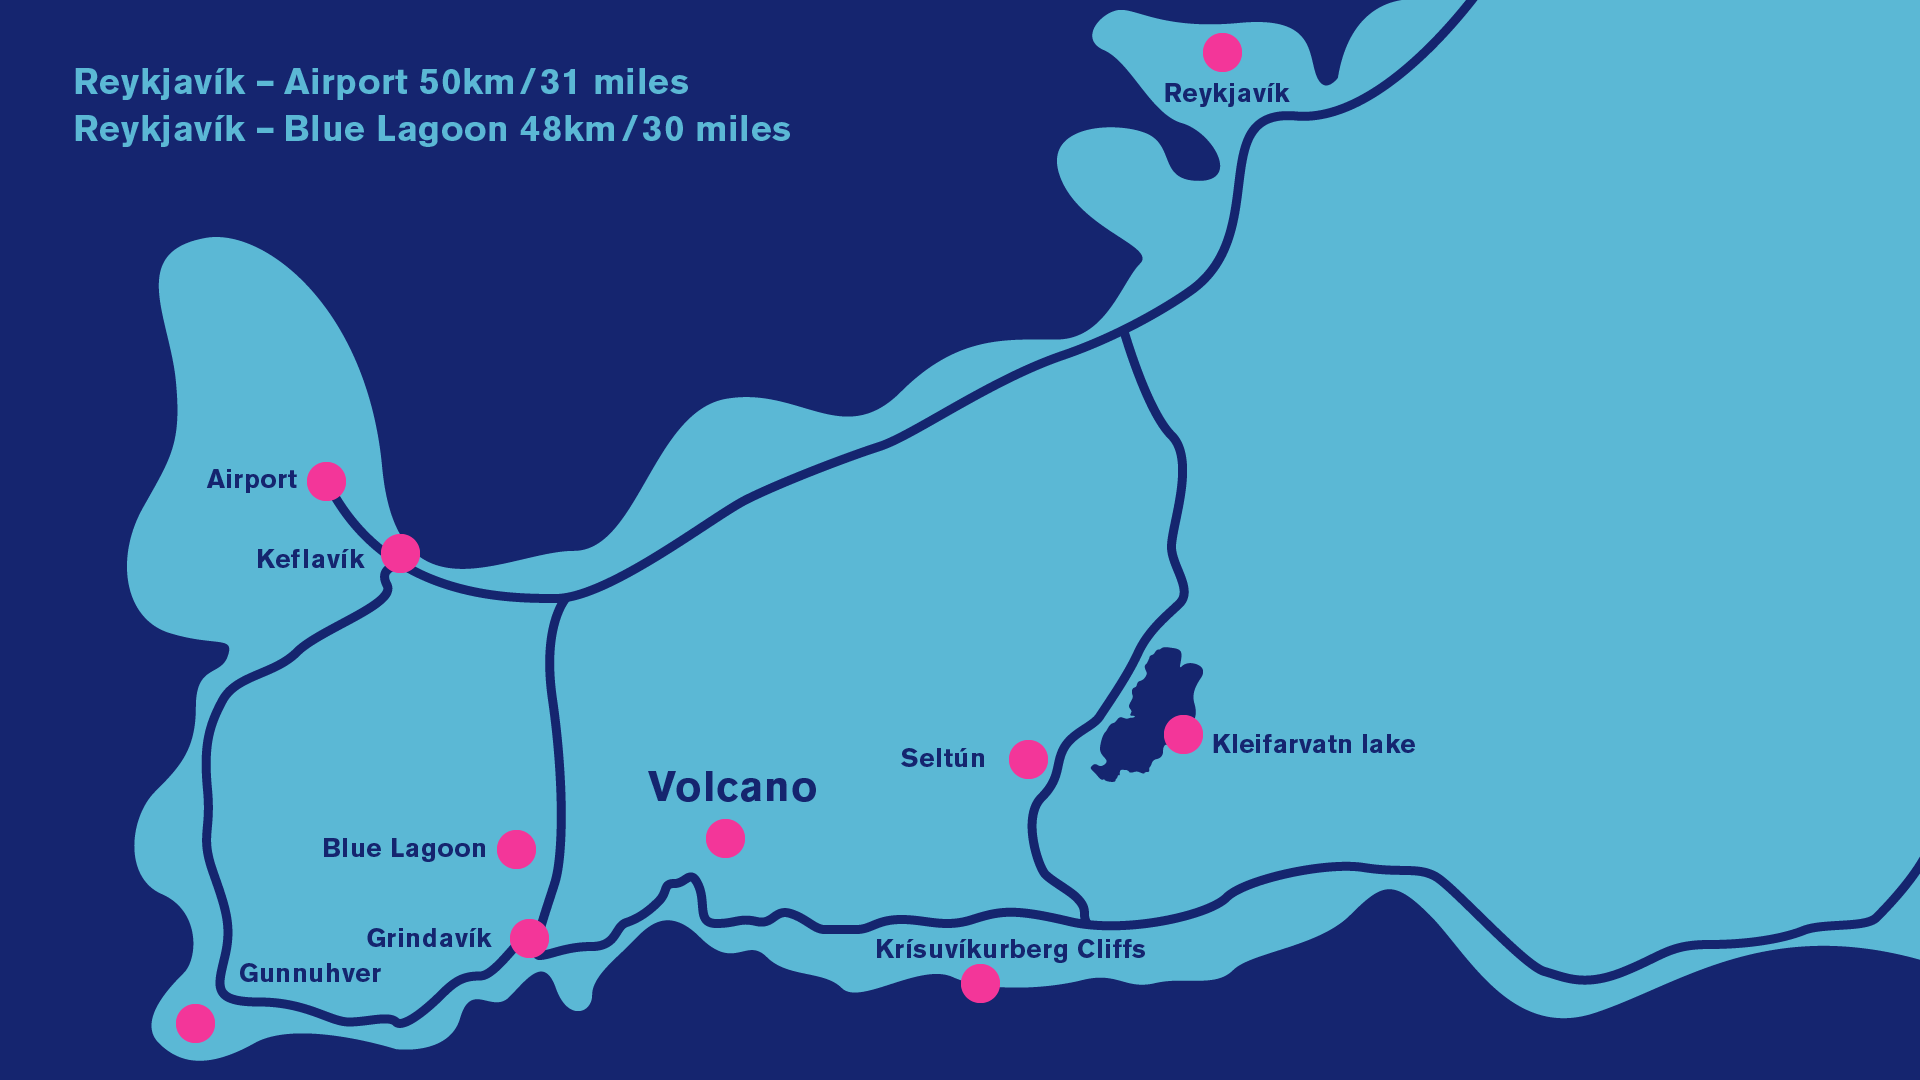 A visual map of the Reykjanes peninsula with volcanic sights marked by pink dots